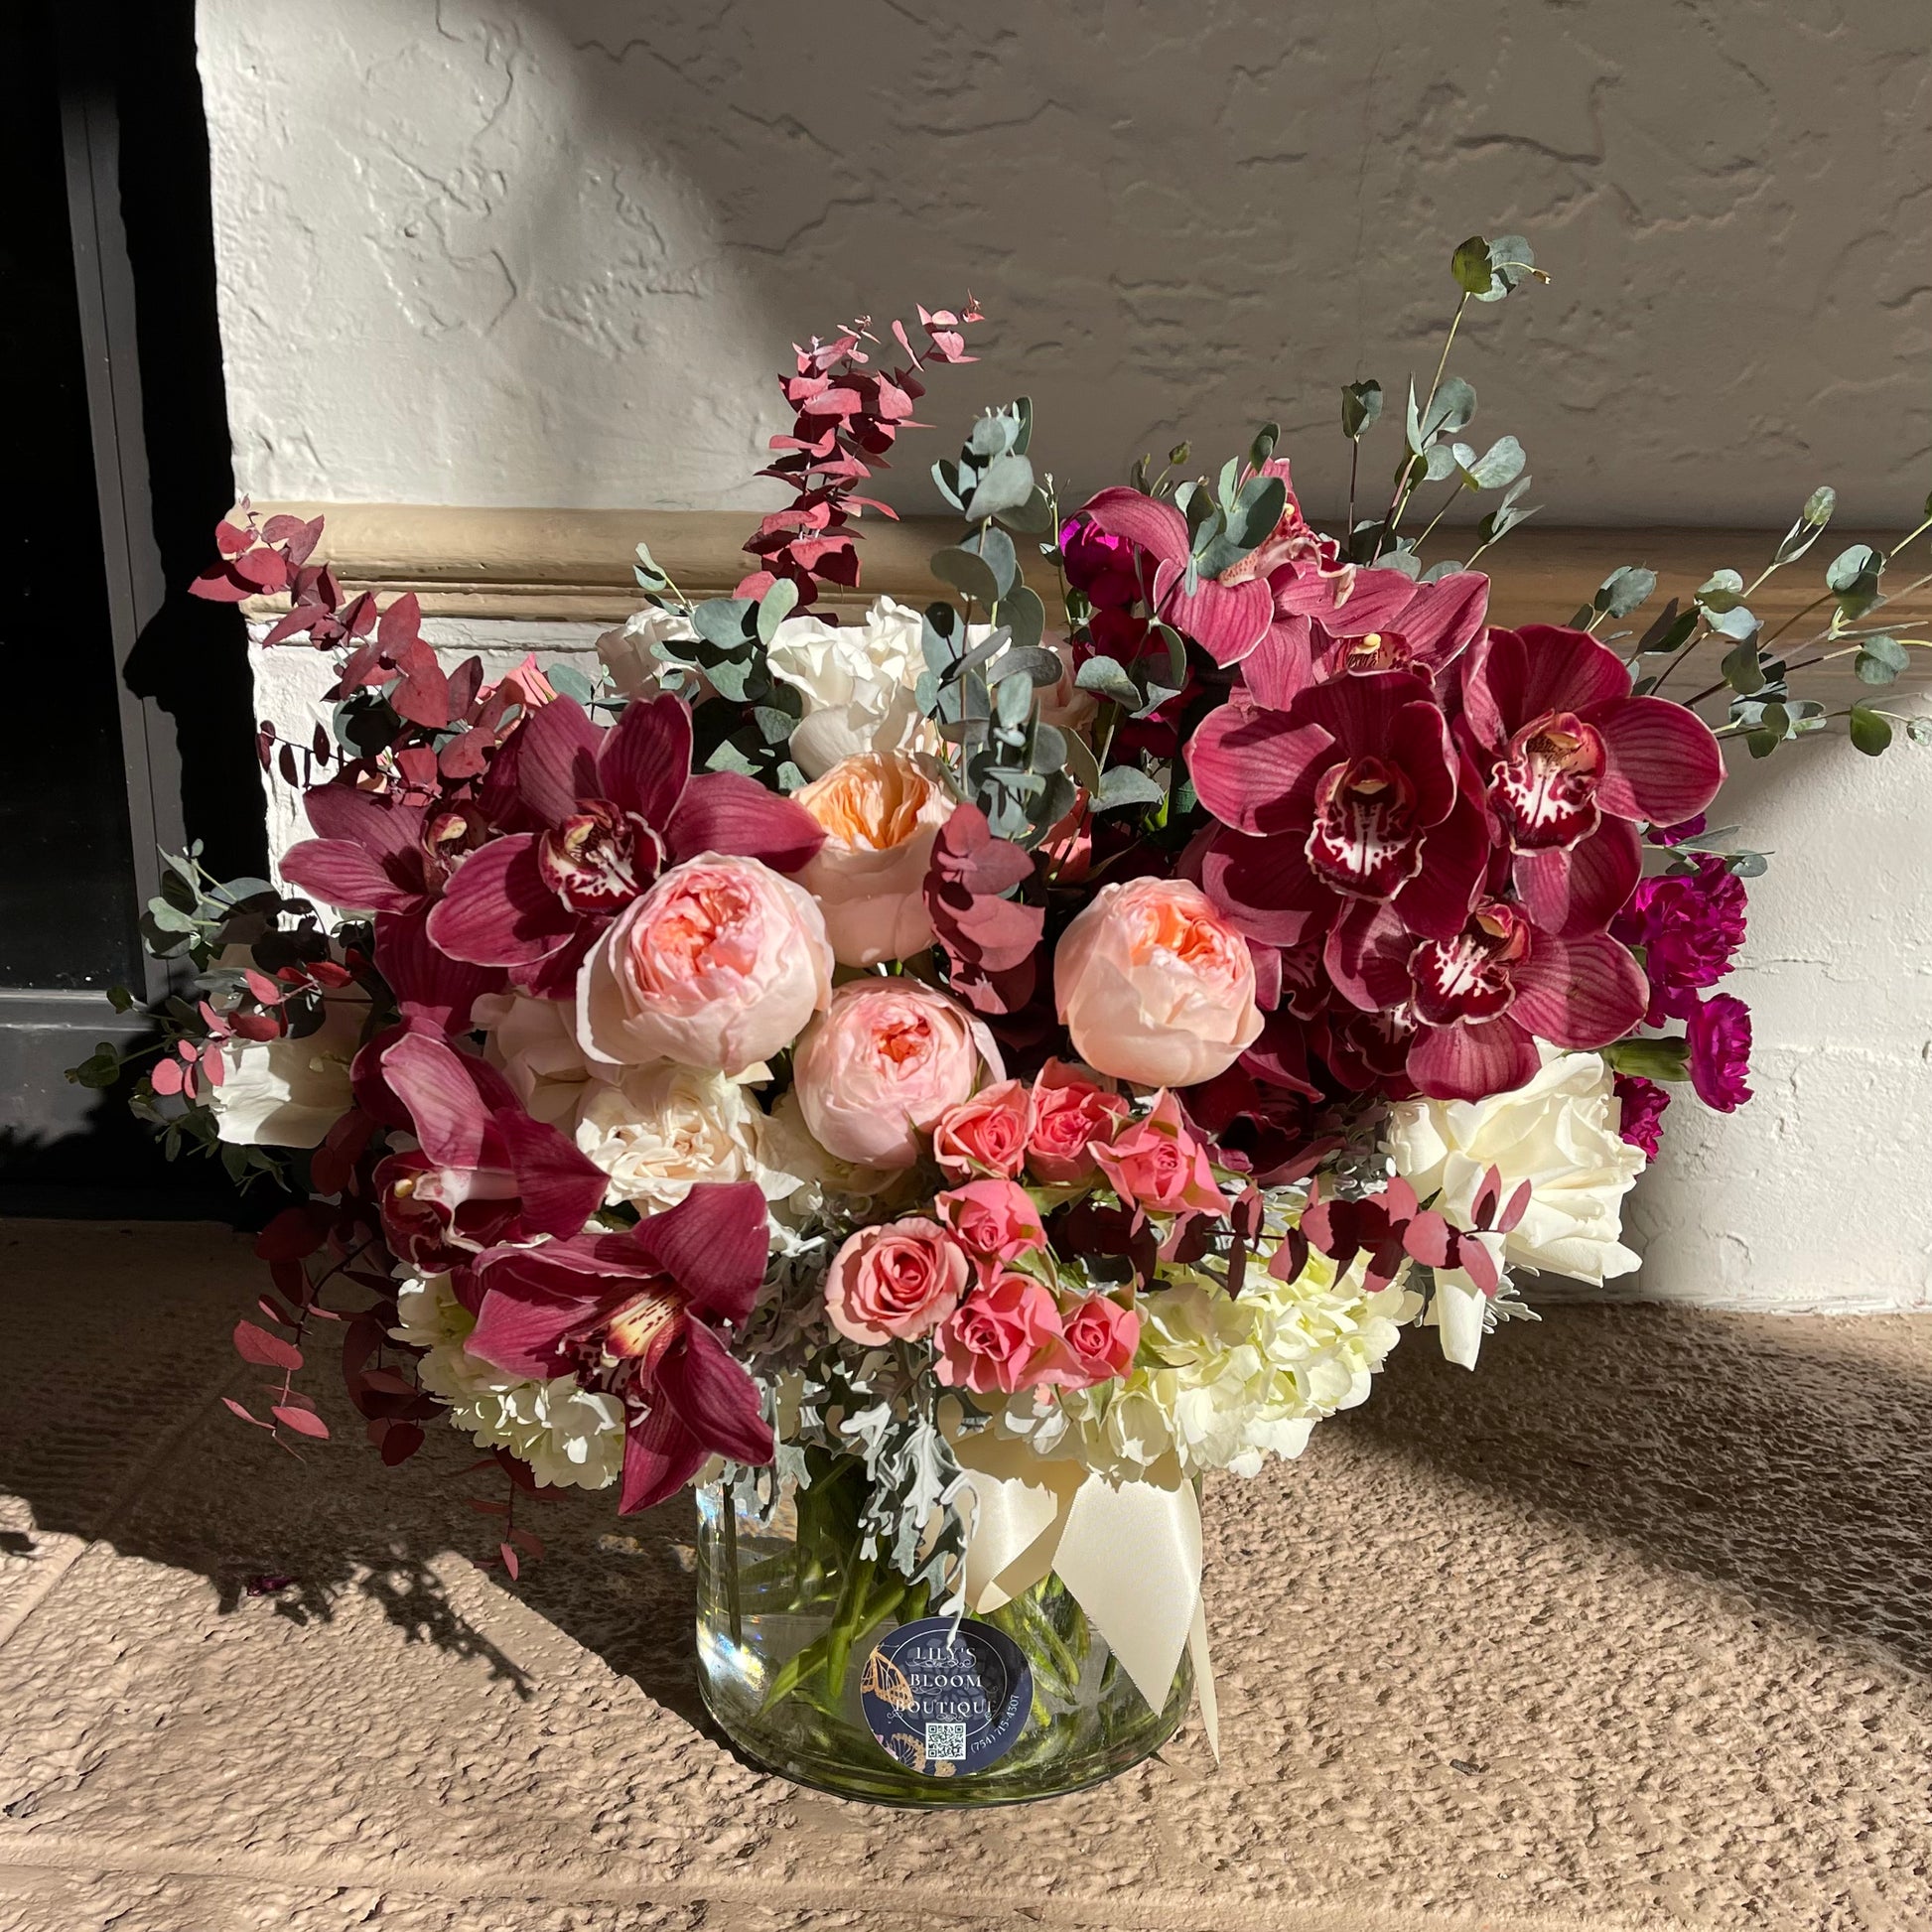 Roses of different shades, orchids, hydrangeas and some greenery in a vase